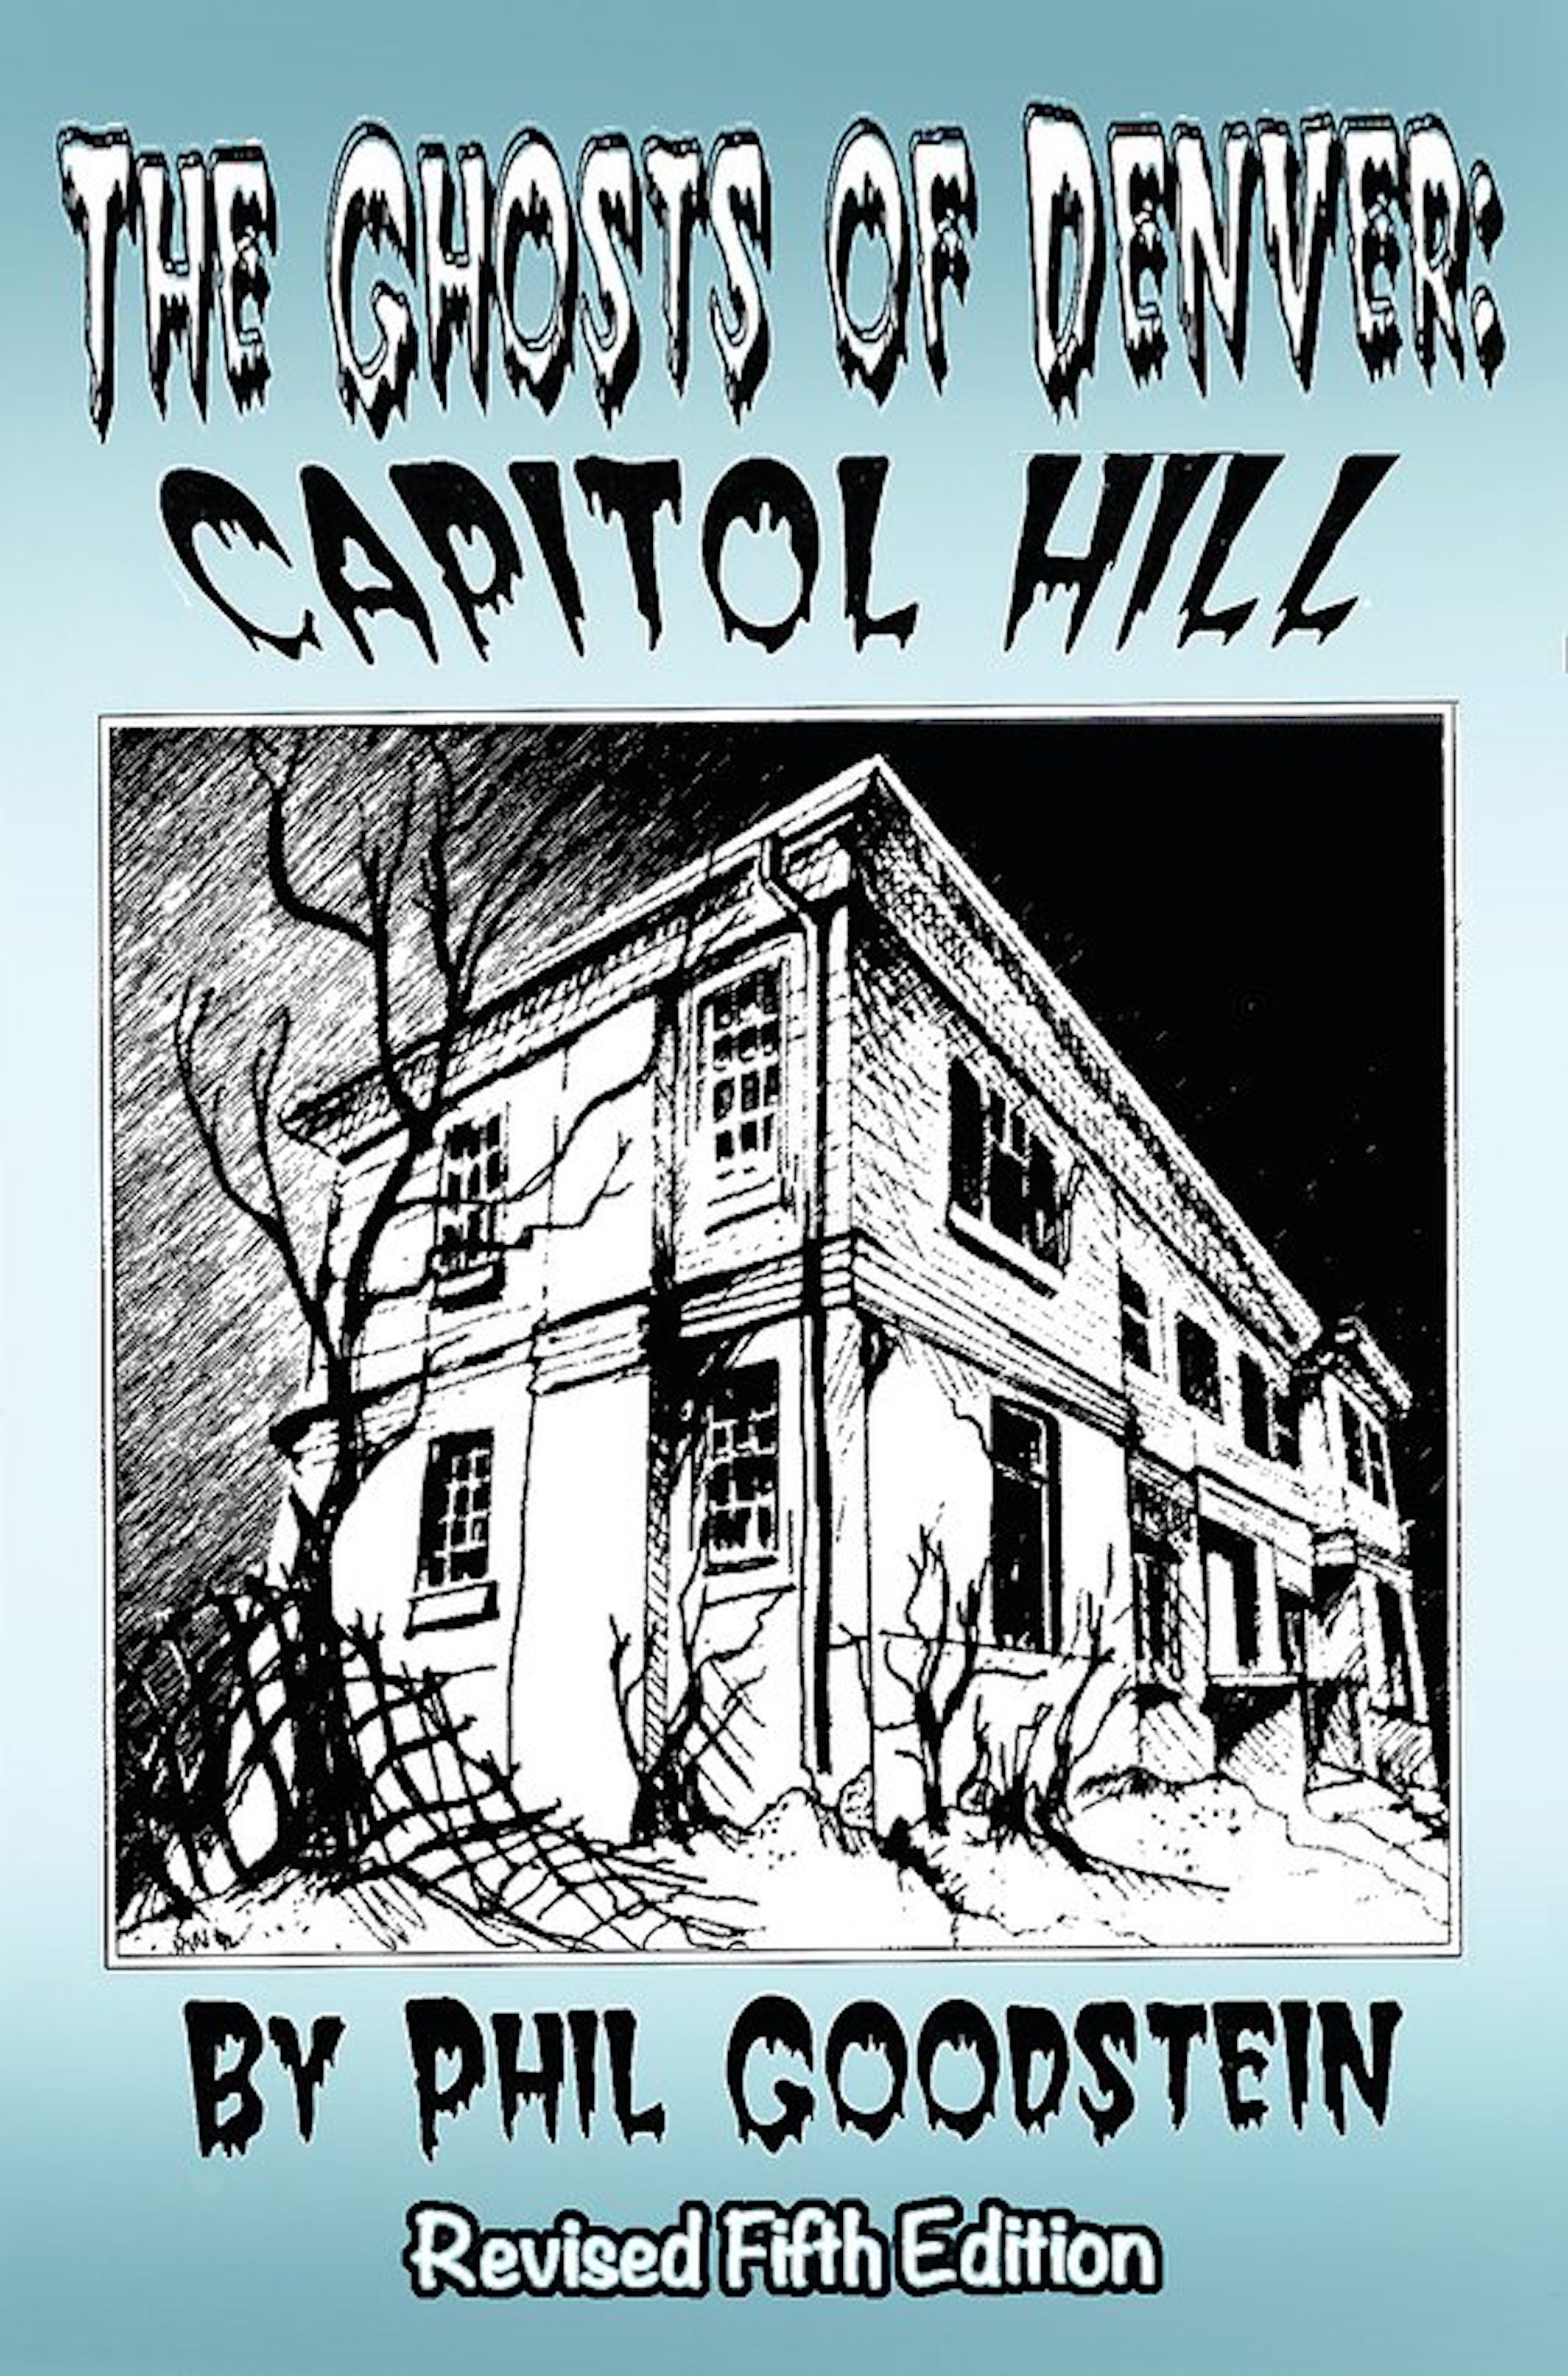 Image of the cover of a book titled, "The Ghosts of Denver: Capitol Hill" by Phil Goodstein. The bottom of the cover says "Revised Fifth Edition." There is an image in the center of the cover; it is a black and white illustration of a historic square building flanked by leafless trees and the sky above fades to black. The font used for the title and author name is spooky, as if the the letters are dripping. The black and white image and text is framed in a cool blue-green color.